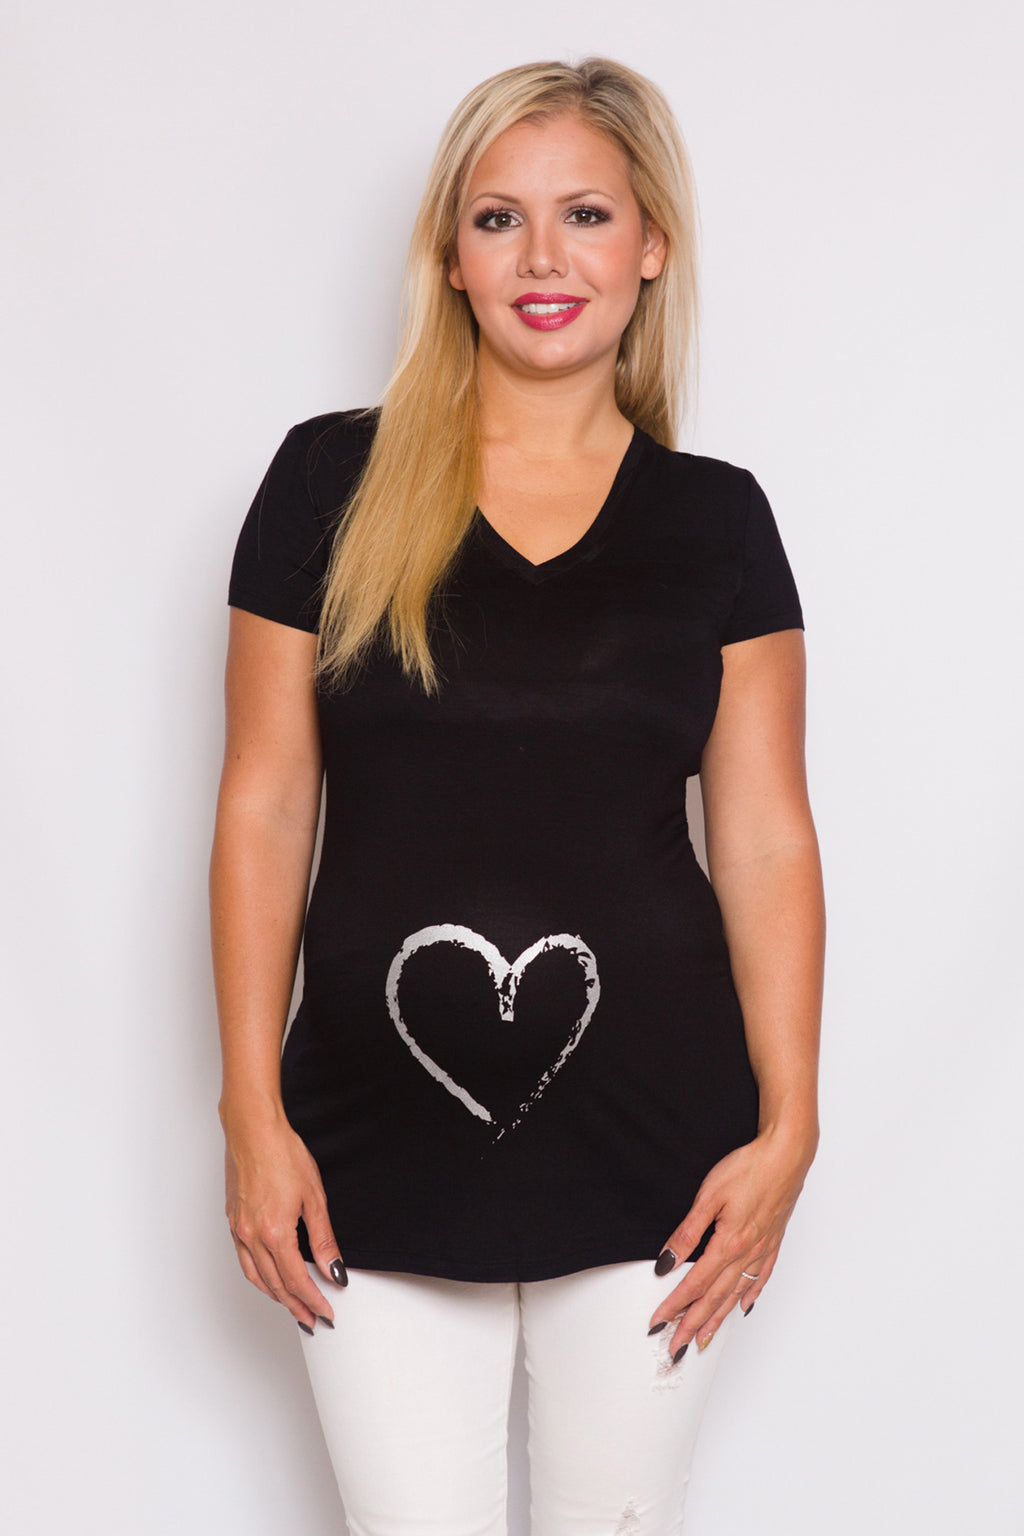 Silver Heart Maternity Top - Mommylicious